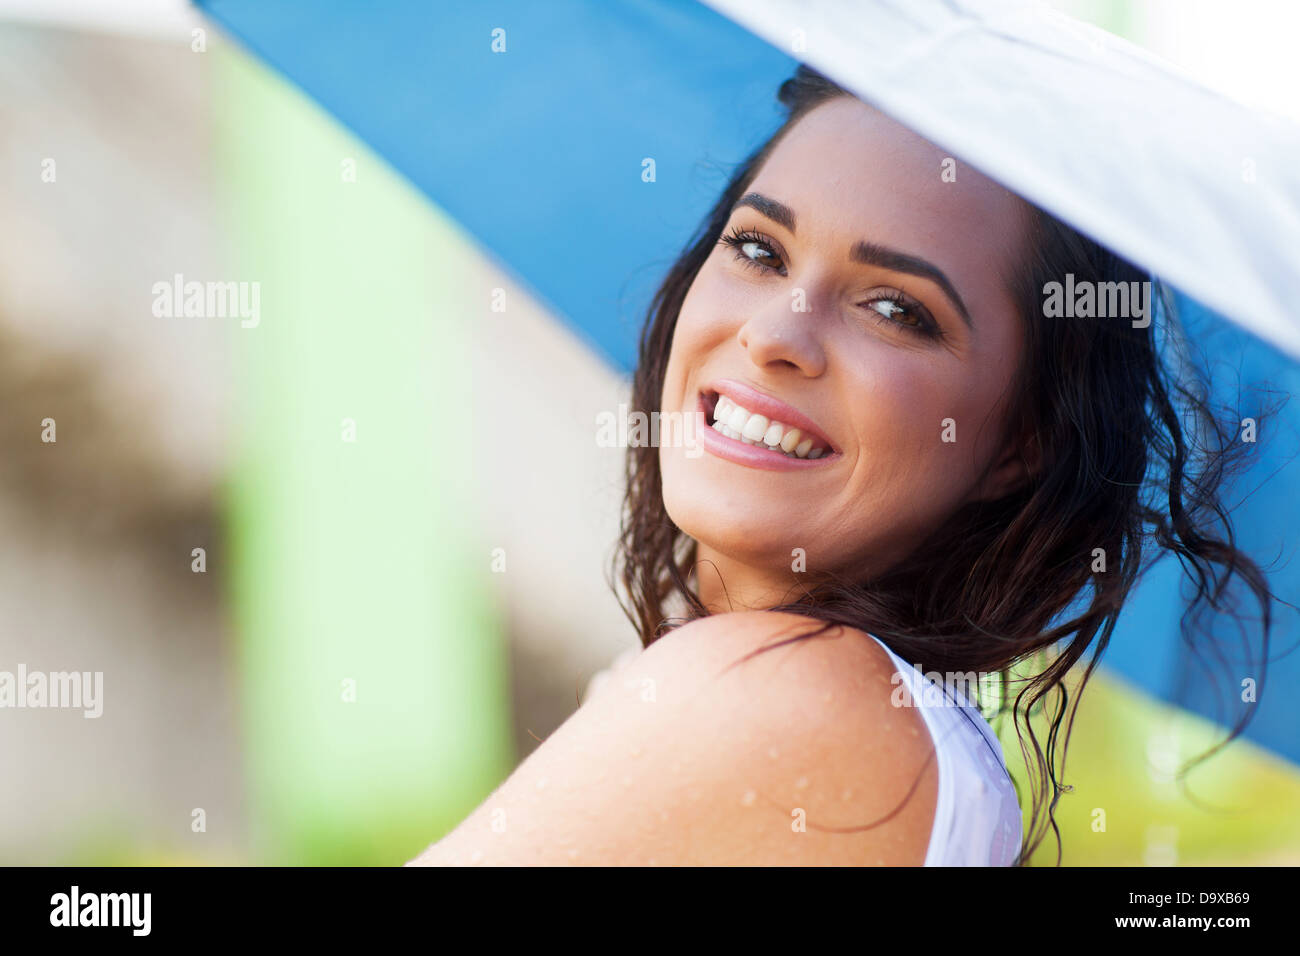 happy young woman holding umbrella in the rain Stock Photo